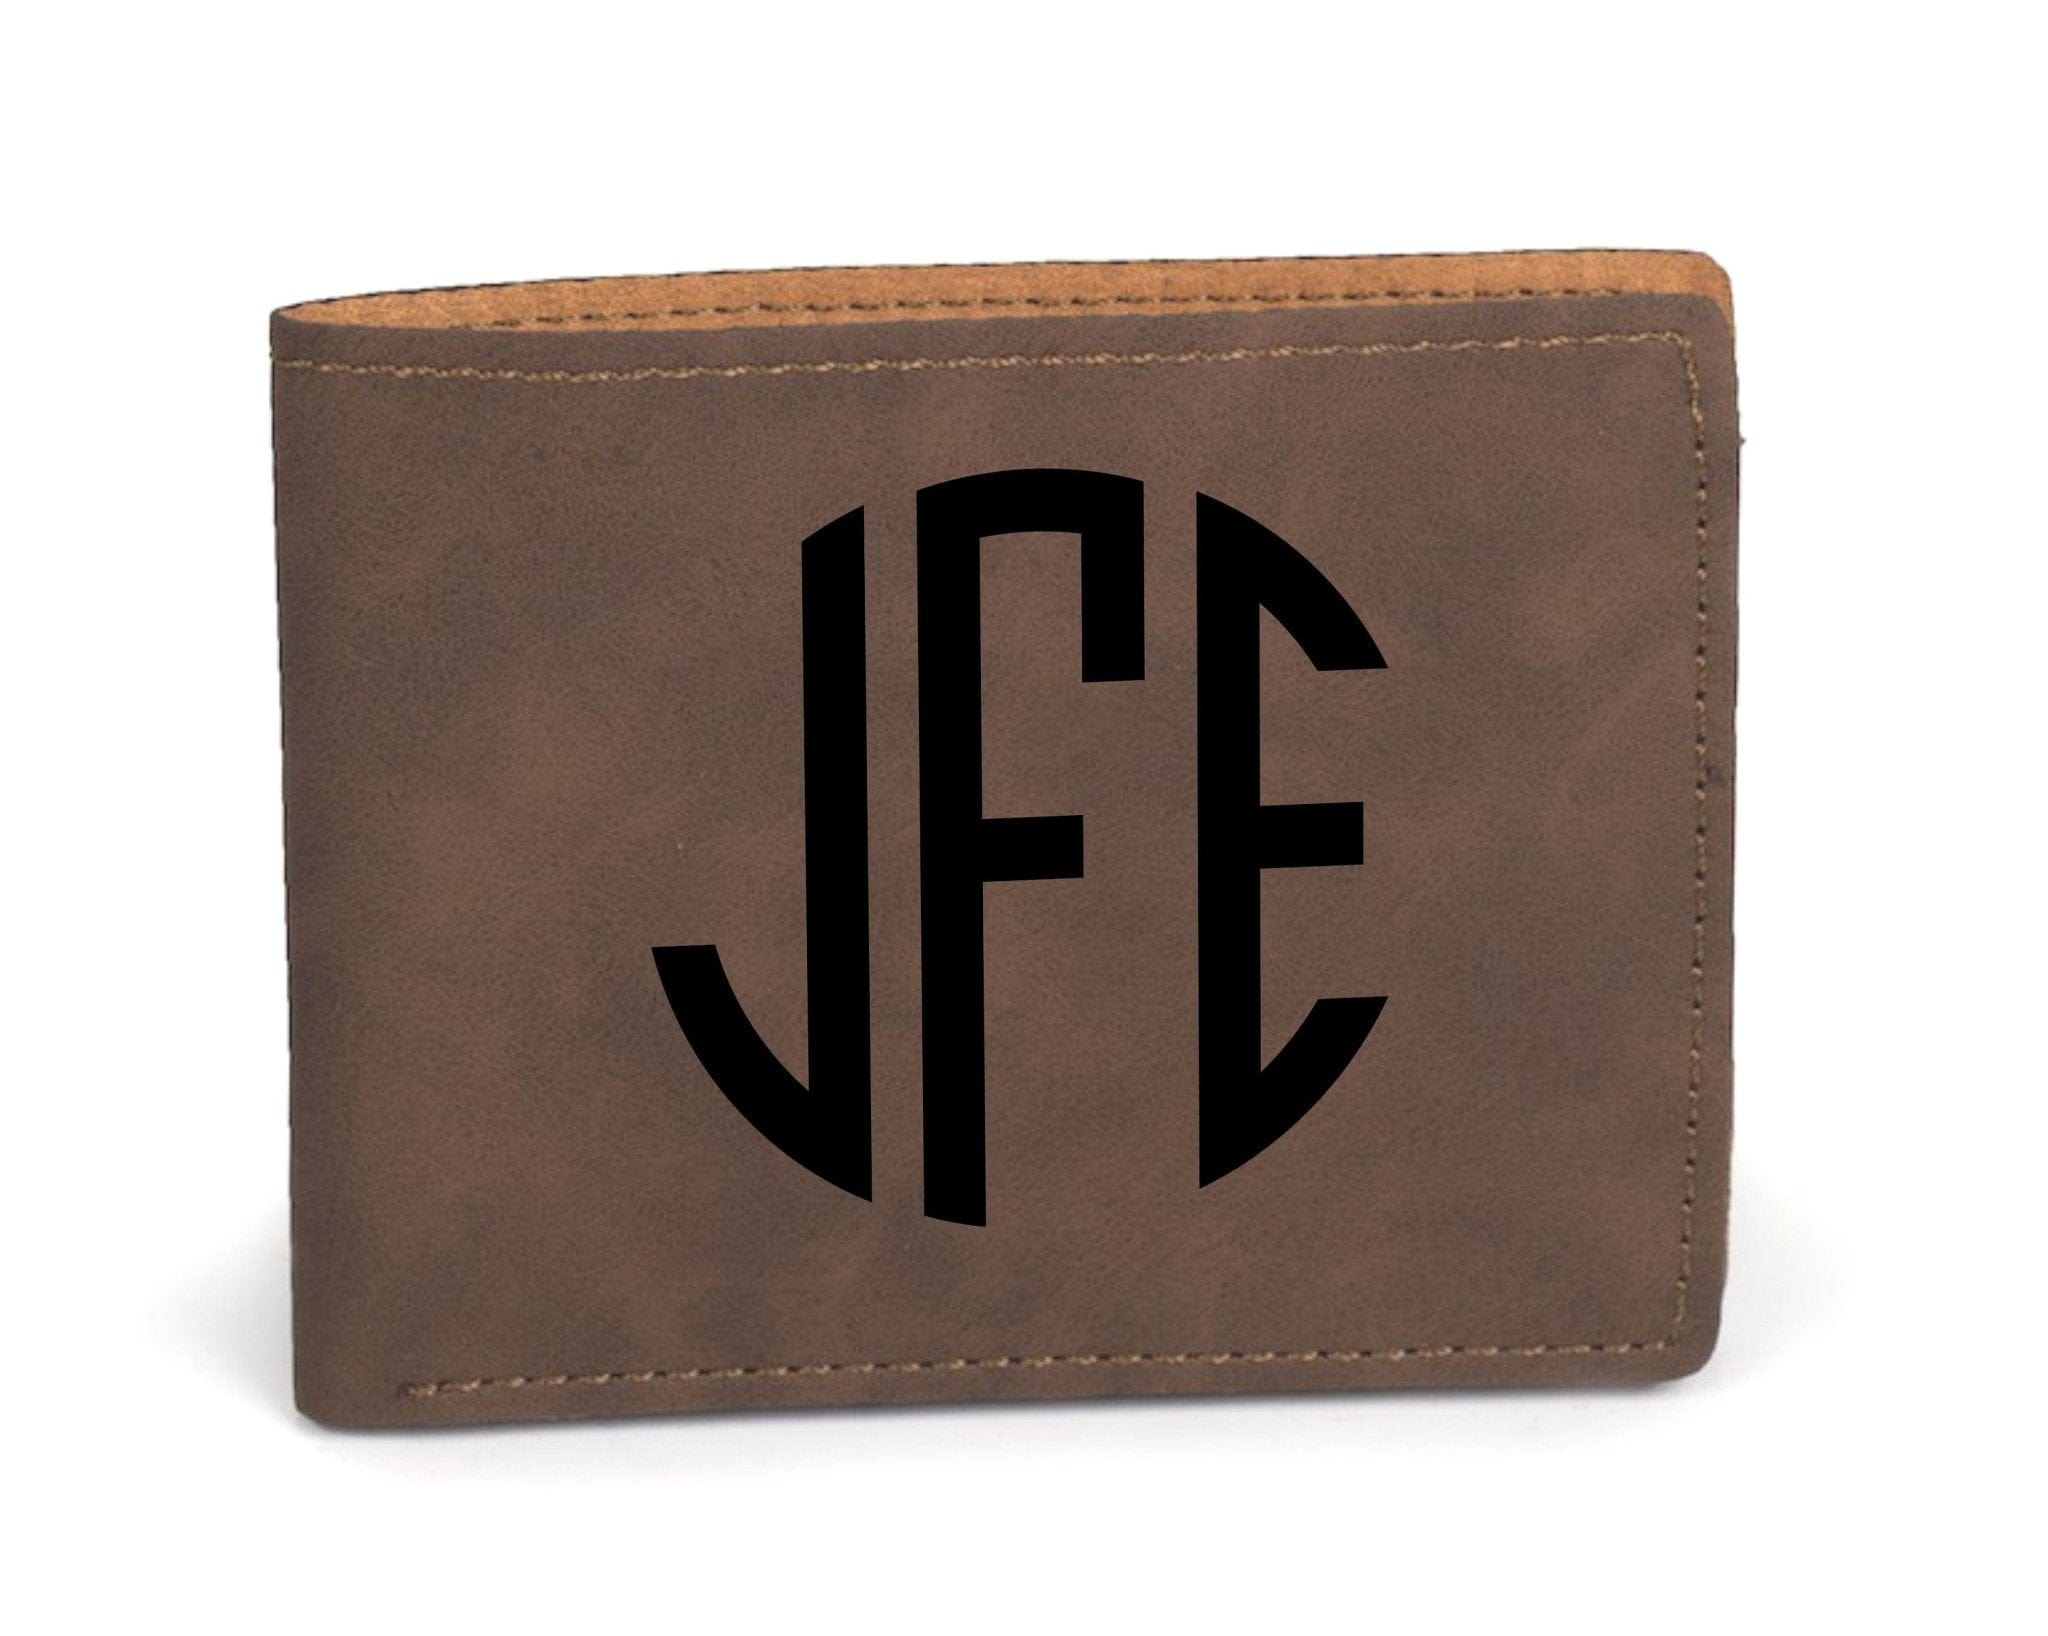 Leather Wallet for Men personalized with his name or initials. Buckskin